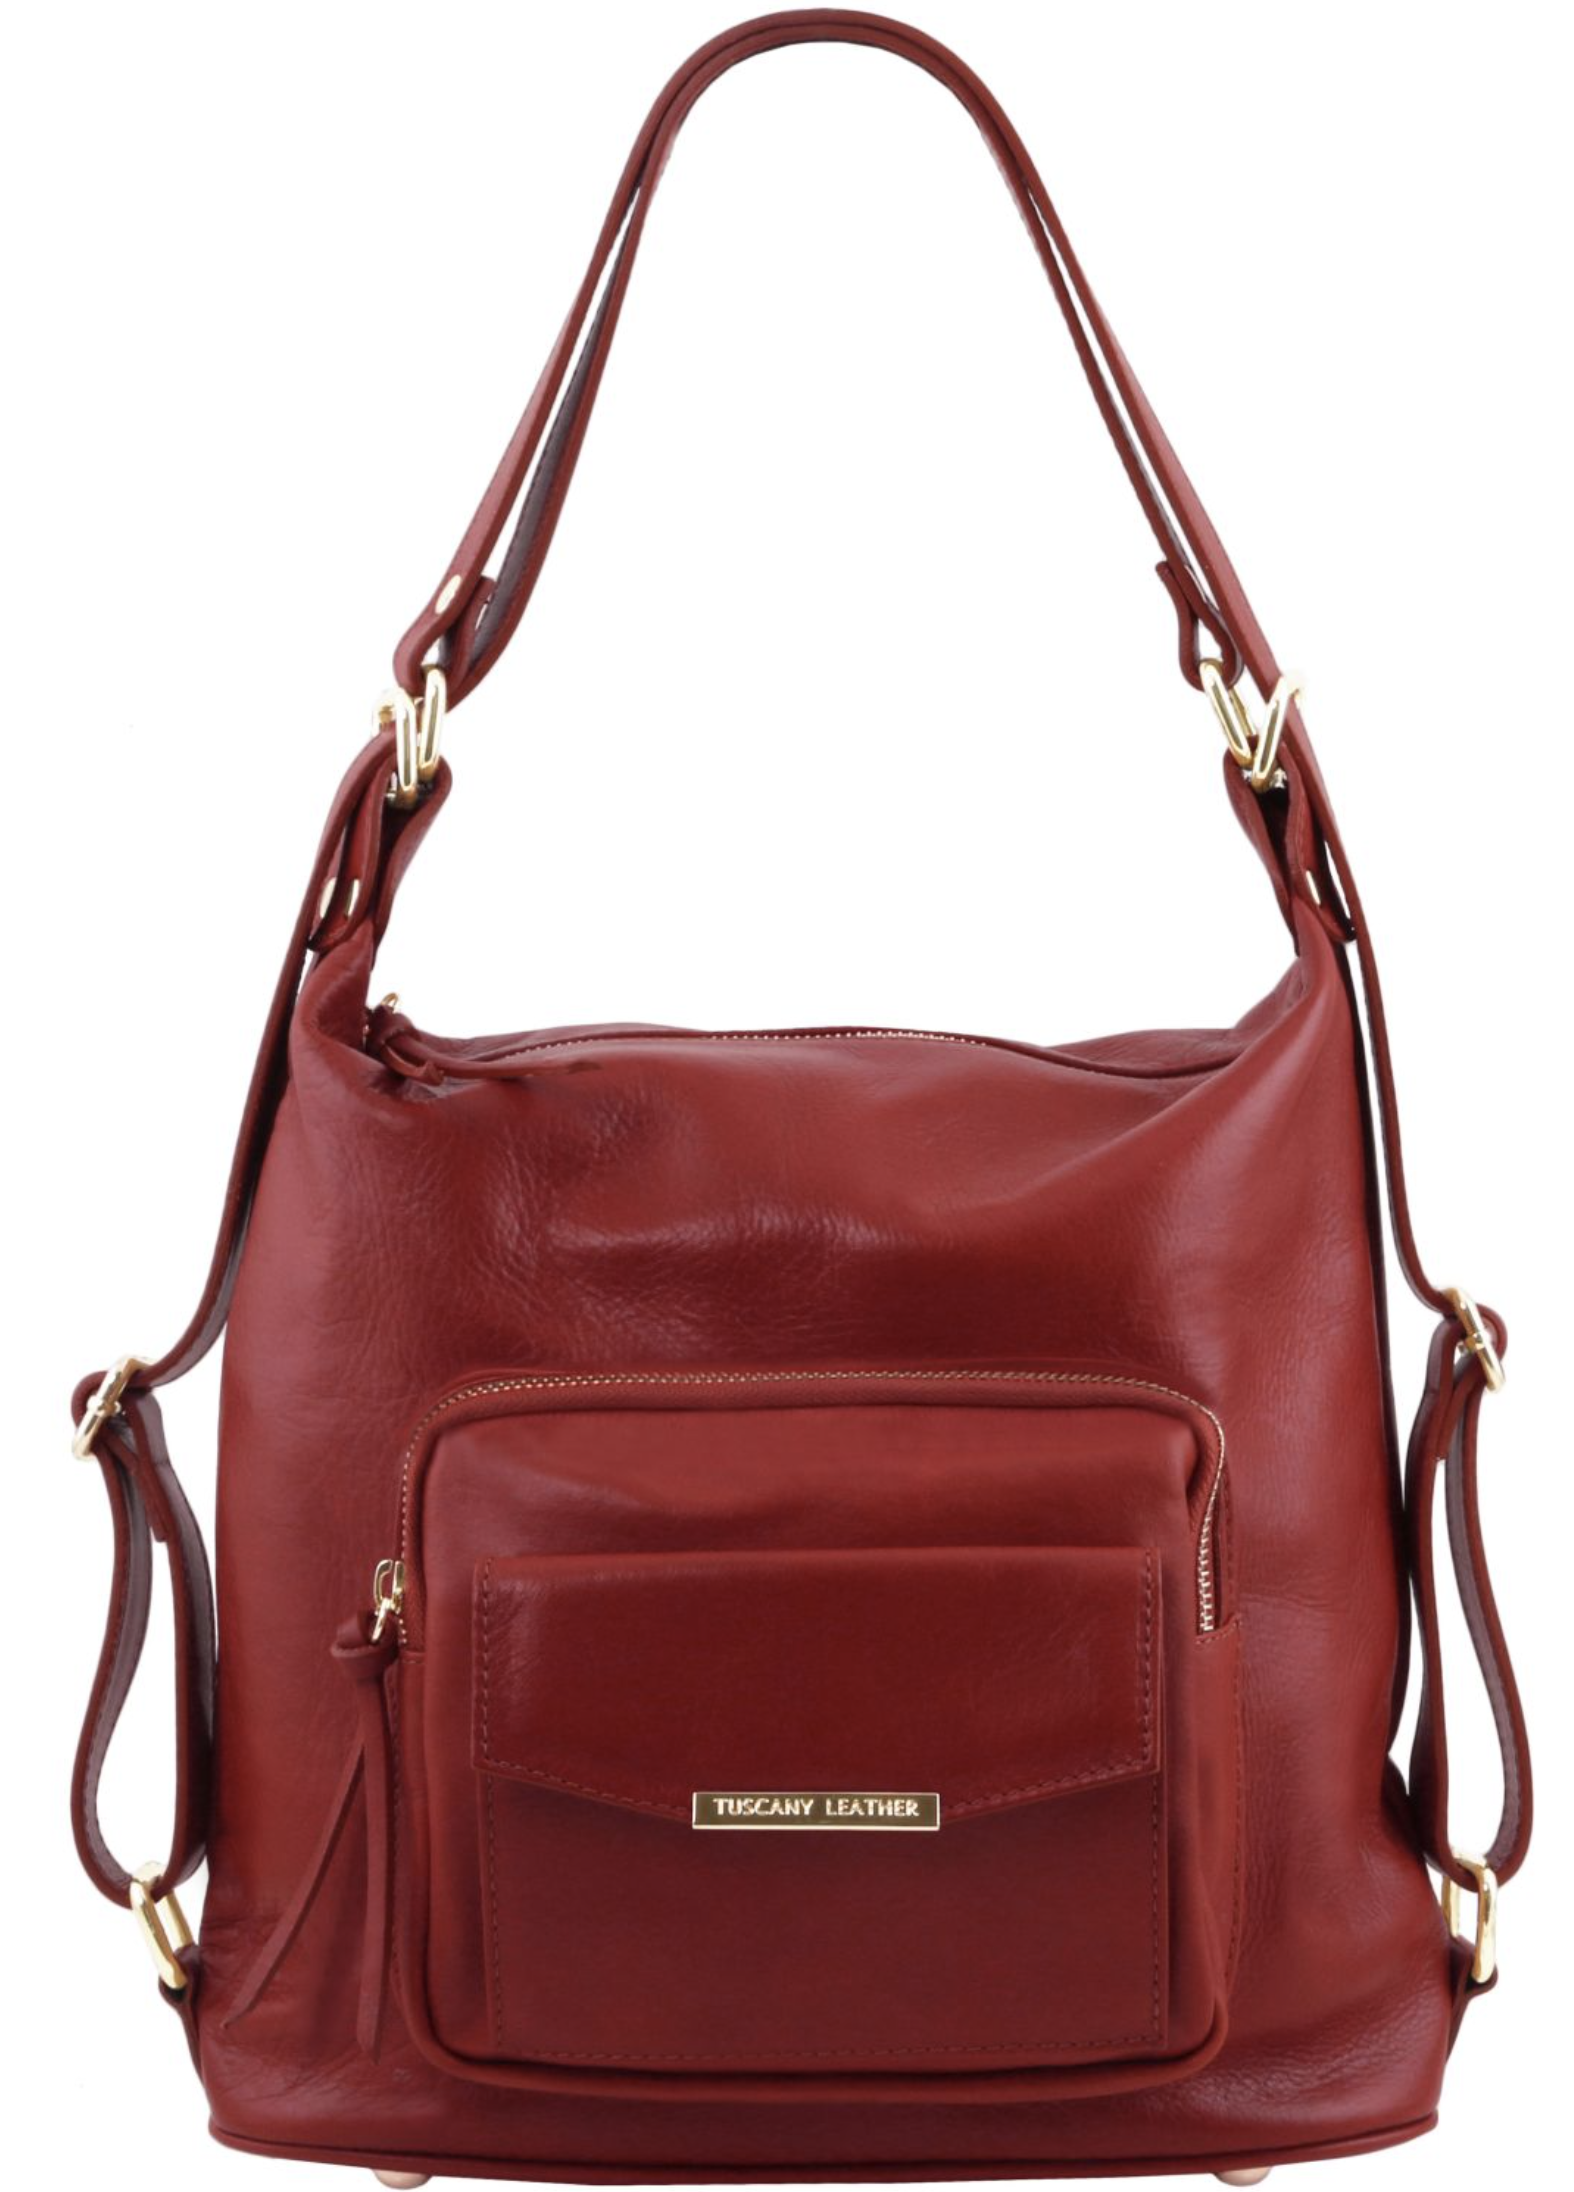 Tuscany Leather TL Leather Convertible Bag